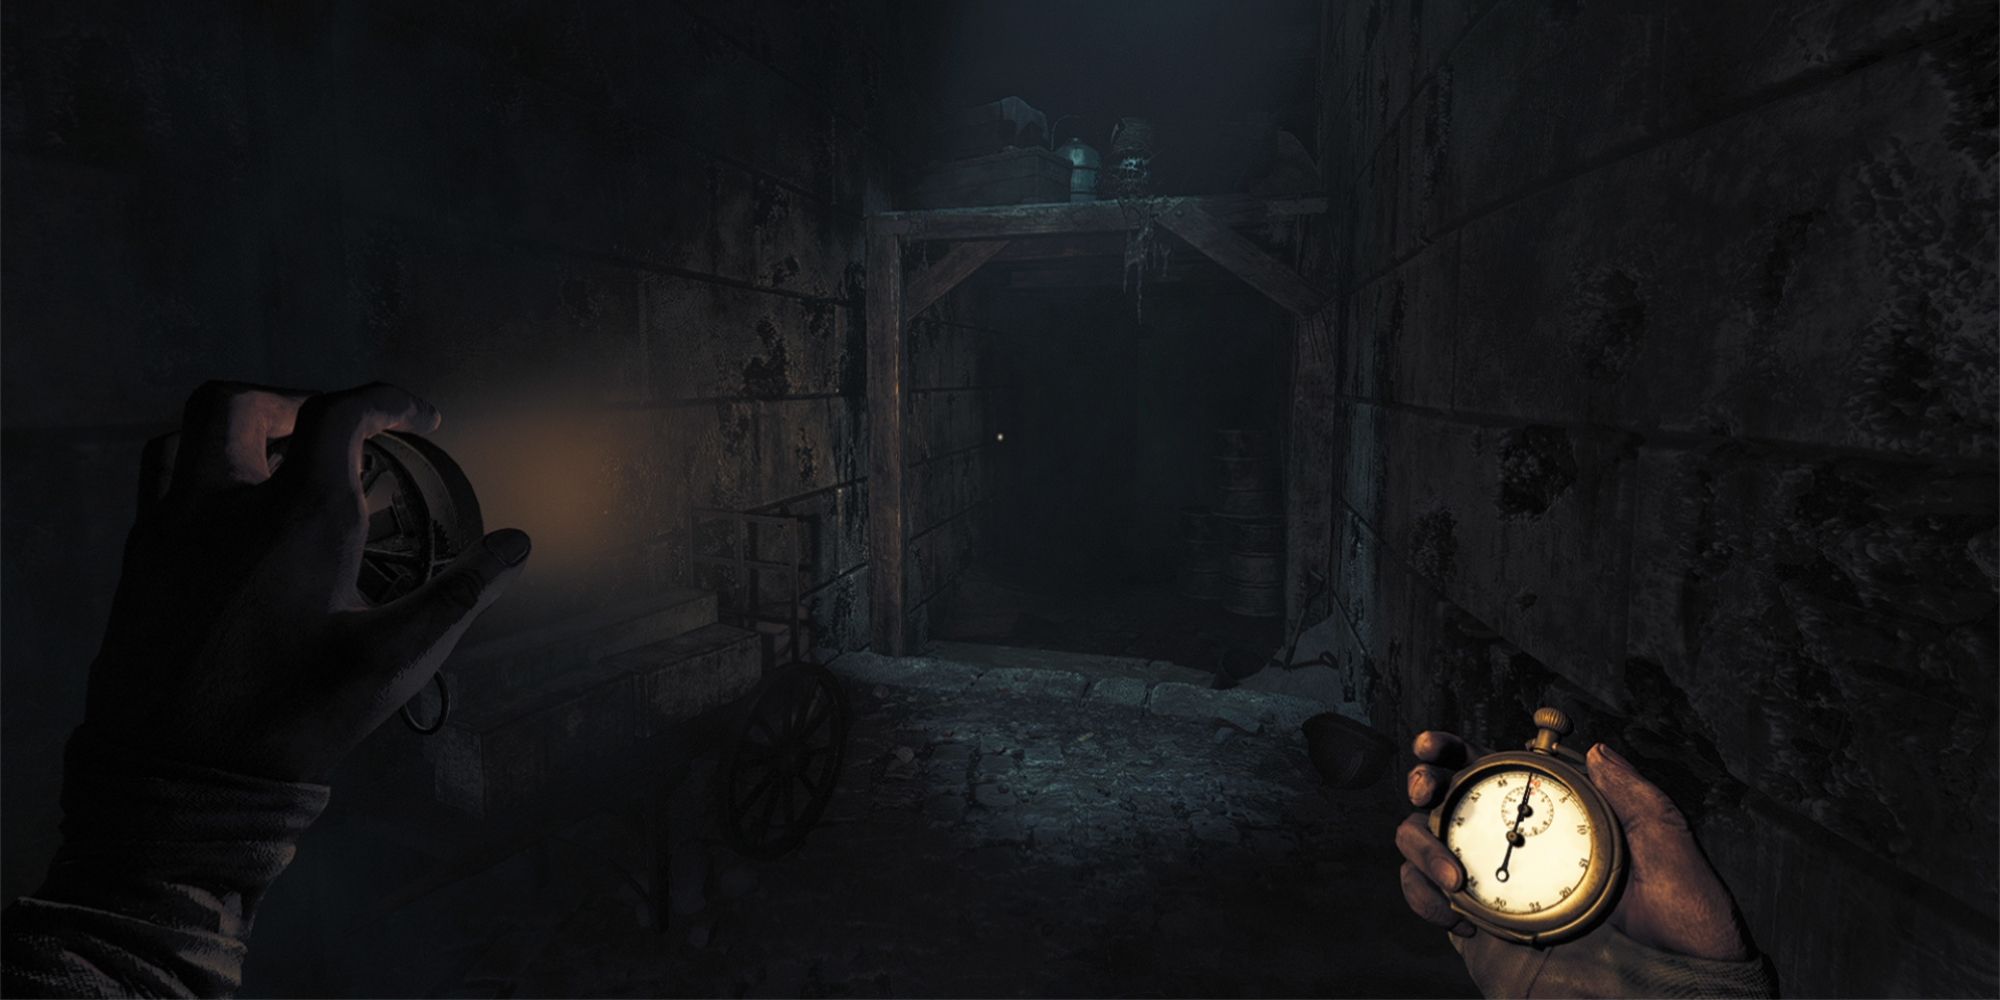 First-person view of someone walking down a dark corridor with a light and stopwatch in their hands